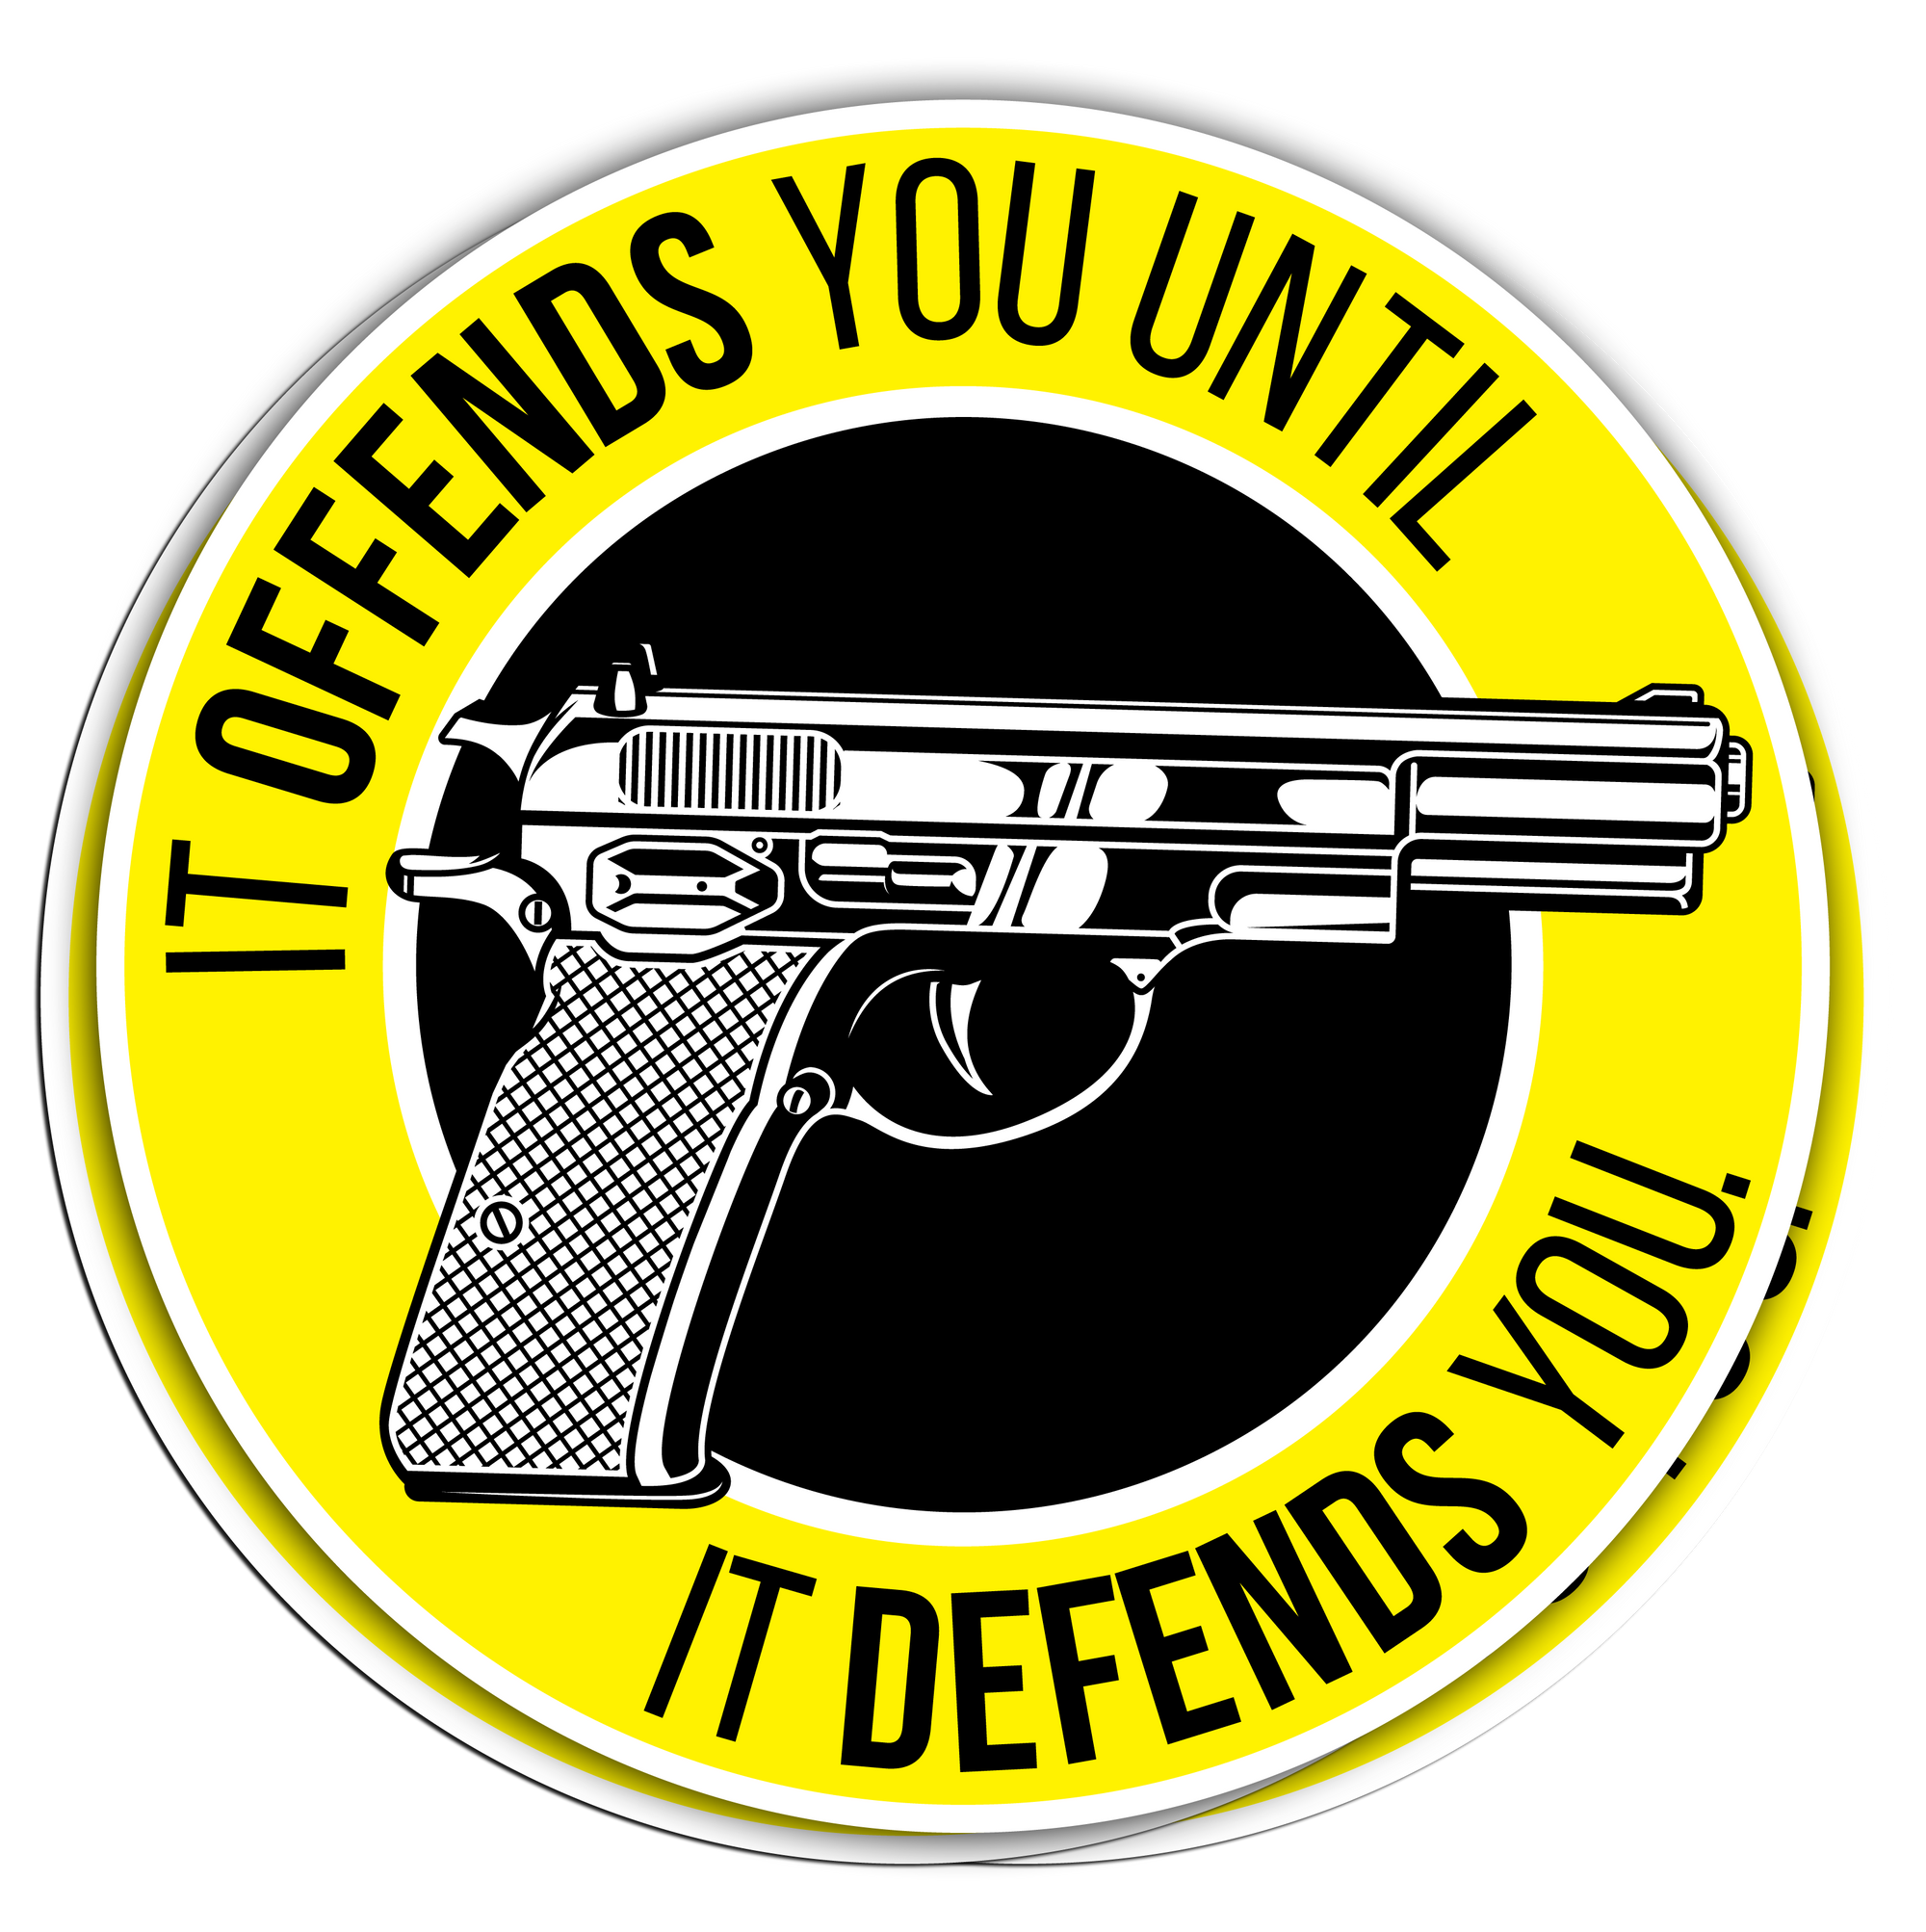 "It Offends You Until It Defends You" - Decal